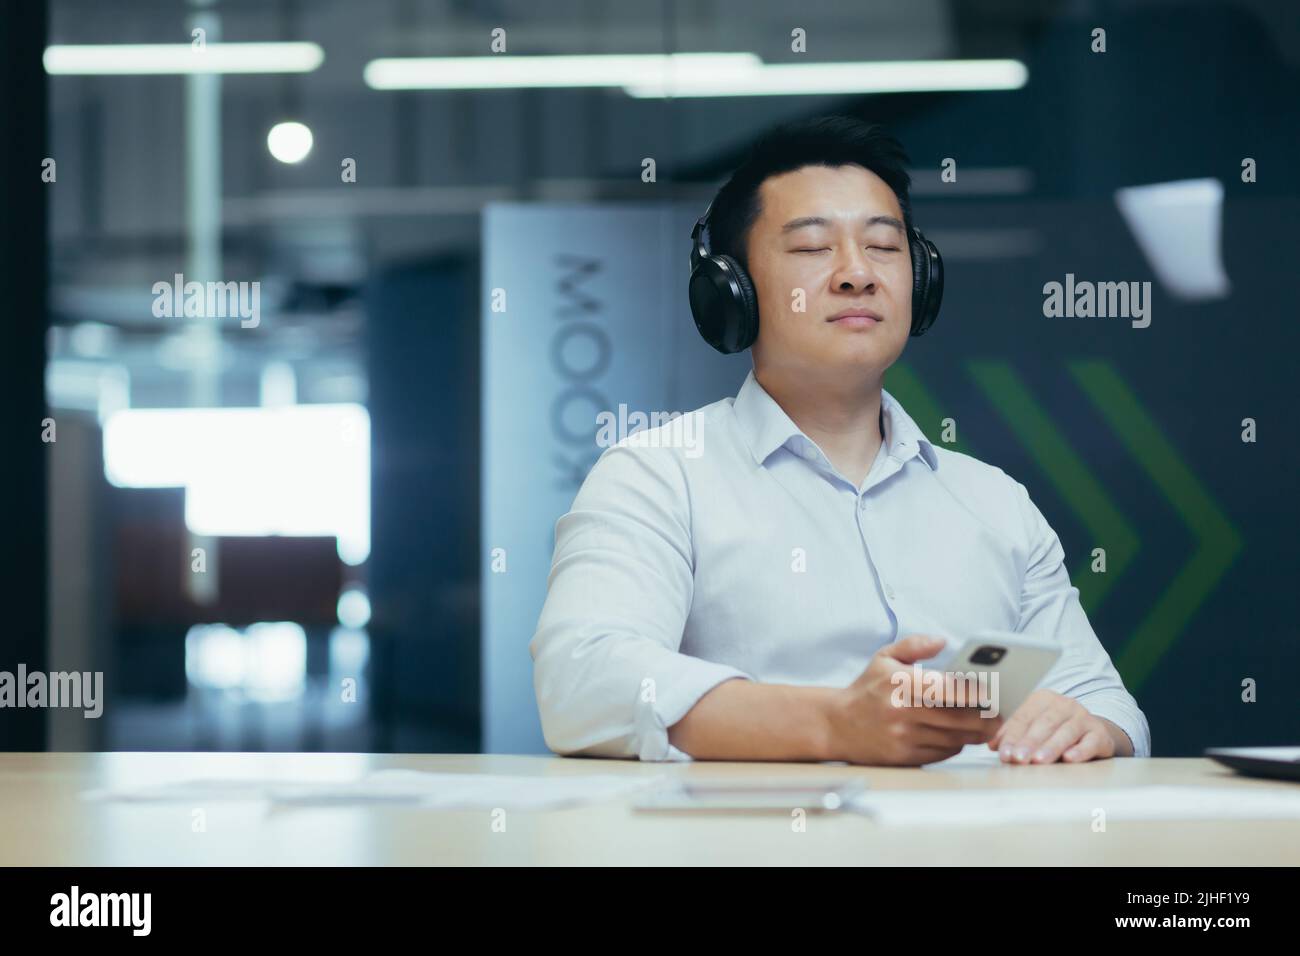 Asian boss business owner relaxing in office, listening relaxing and relaxing music, man sitting at desk, using big headphones and online listening app on phone Stock Photo